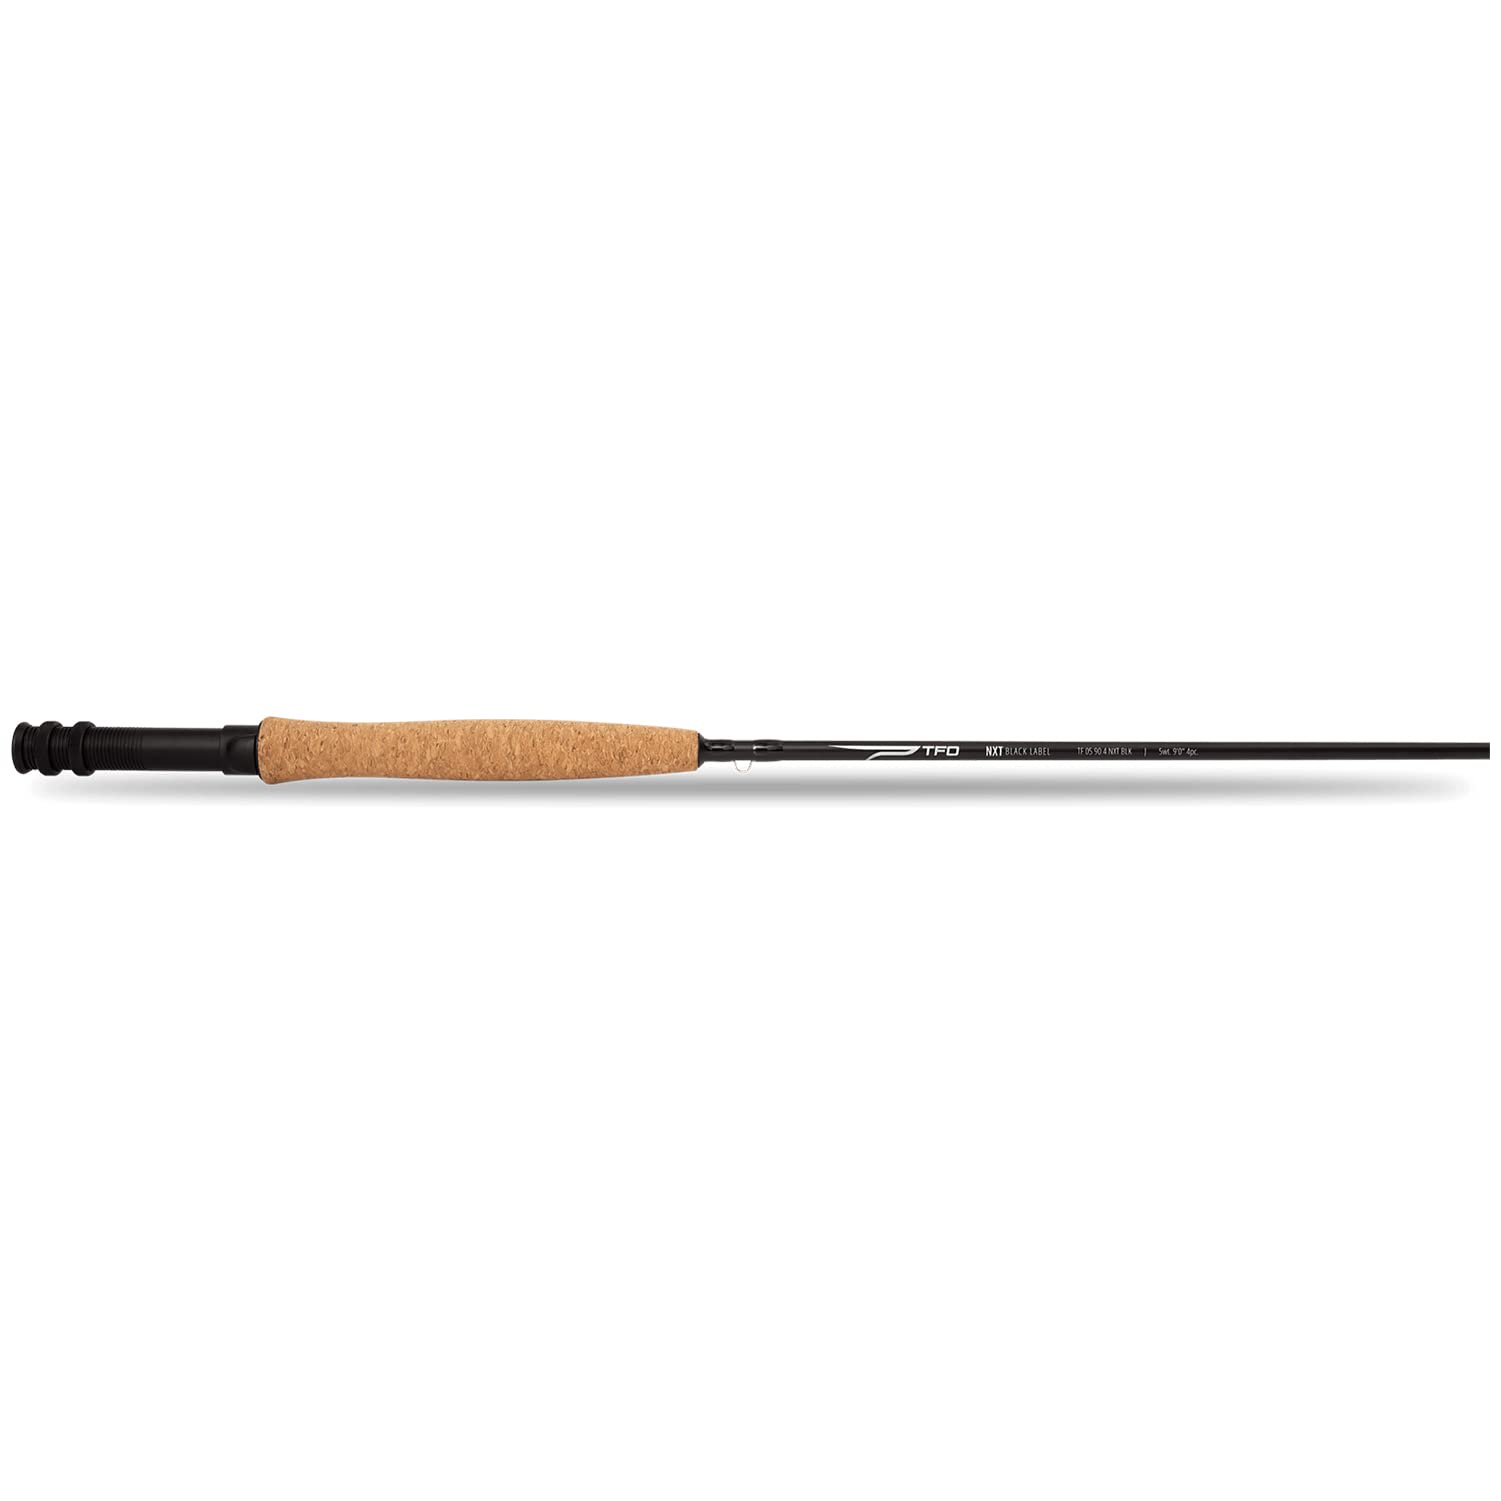 TEMPLE FORK OUTFITTERS NXT Black Label Freshwater Saltwater Moderate Action  4-Piece Fly Fishing Rods - Rod & Reel Kits Available Rod (Handle Type A)  5WT 9'0'' 4pc